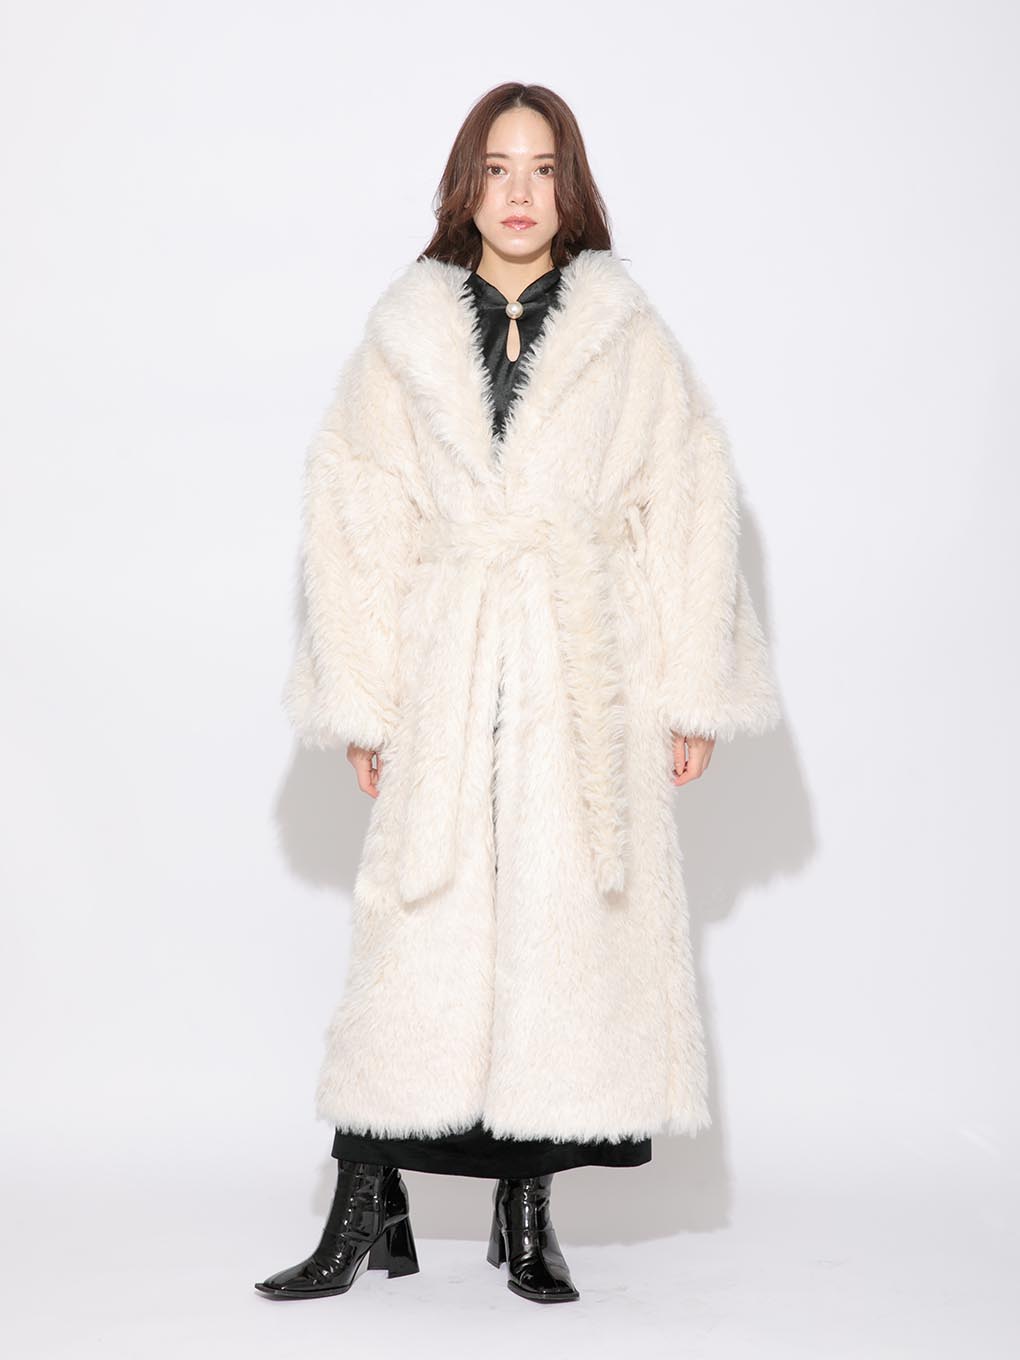 melt the lady wrapping gown coat ロング コート新品未使用でお譲り頂きましたが